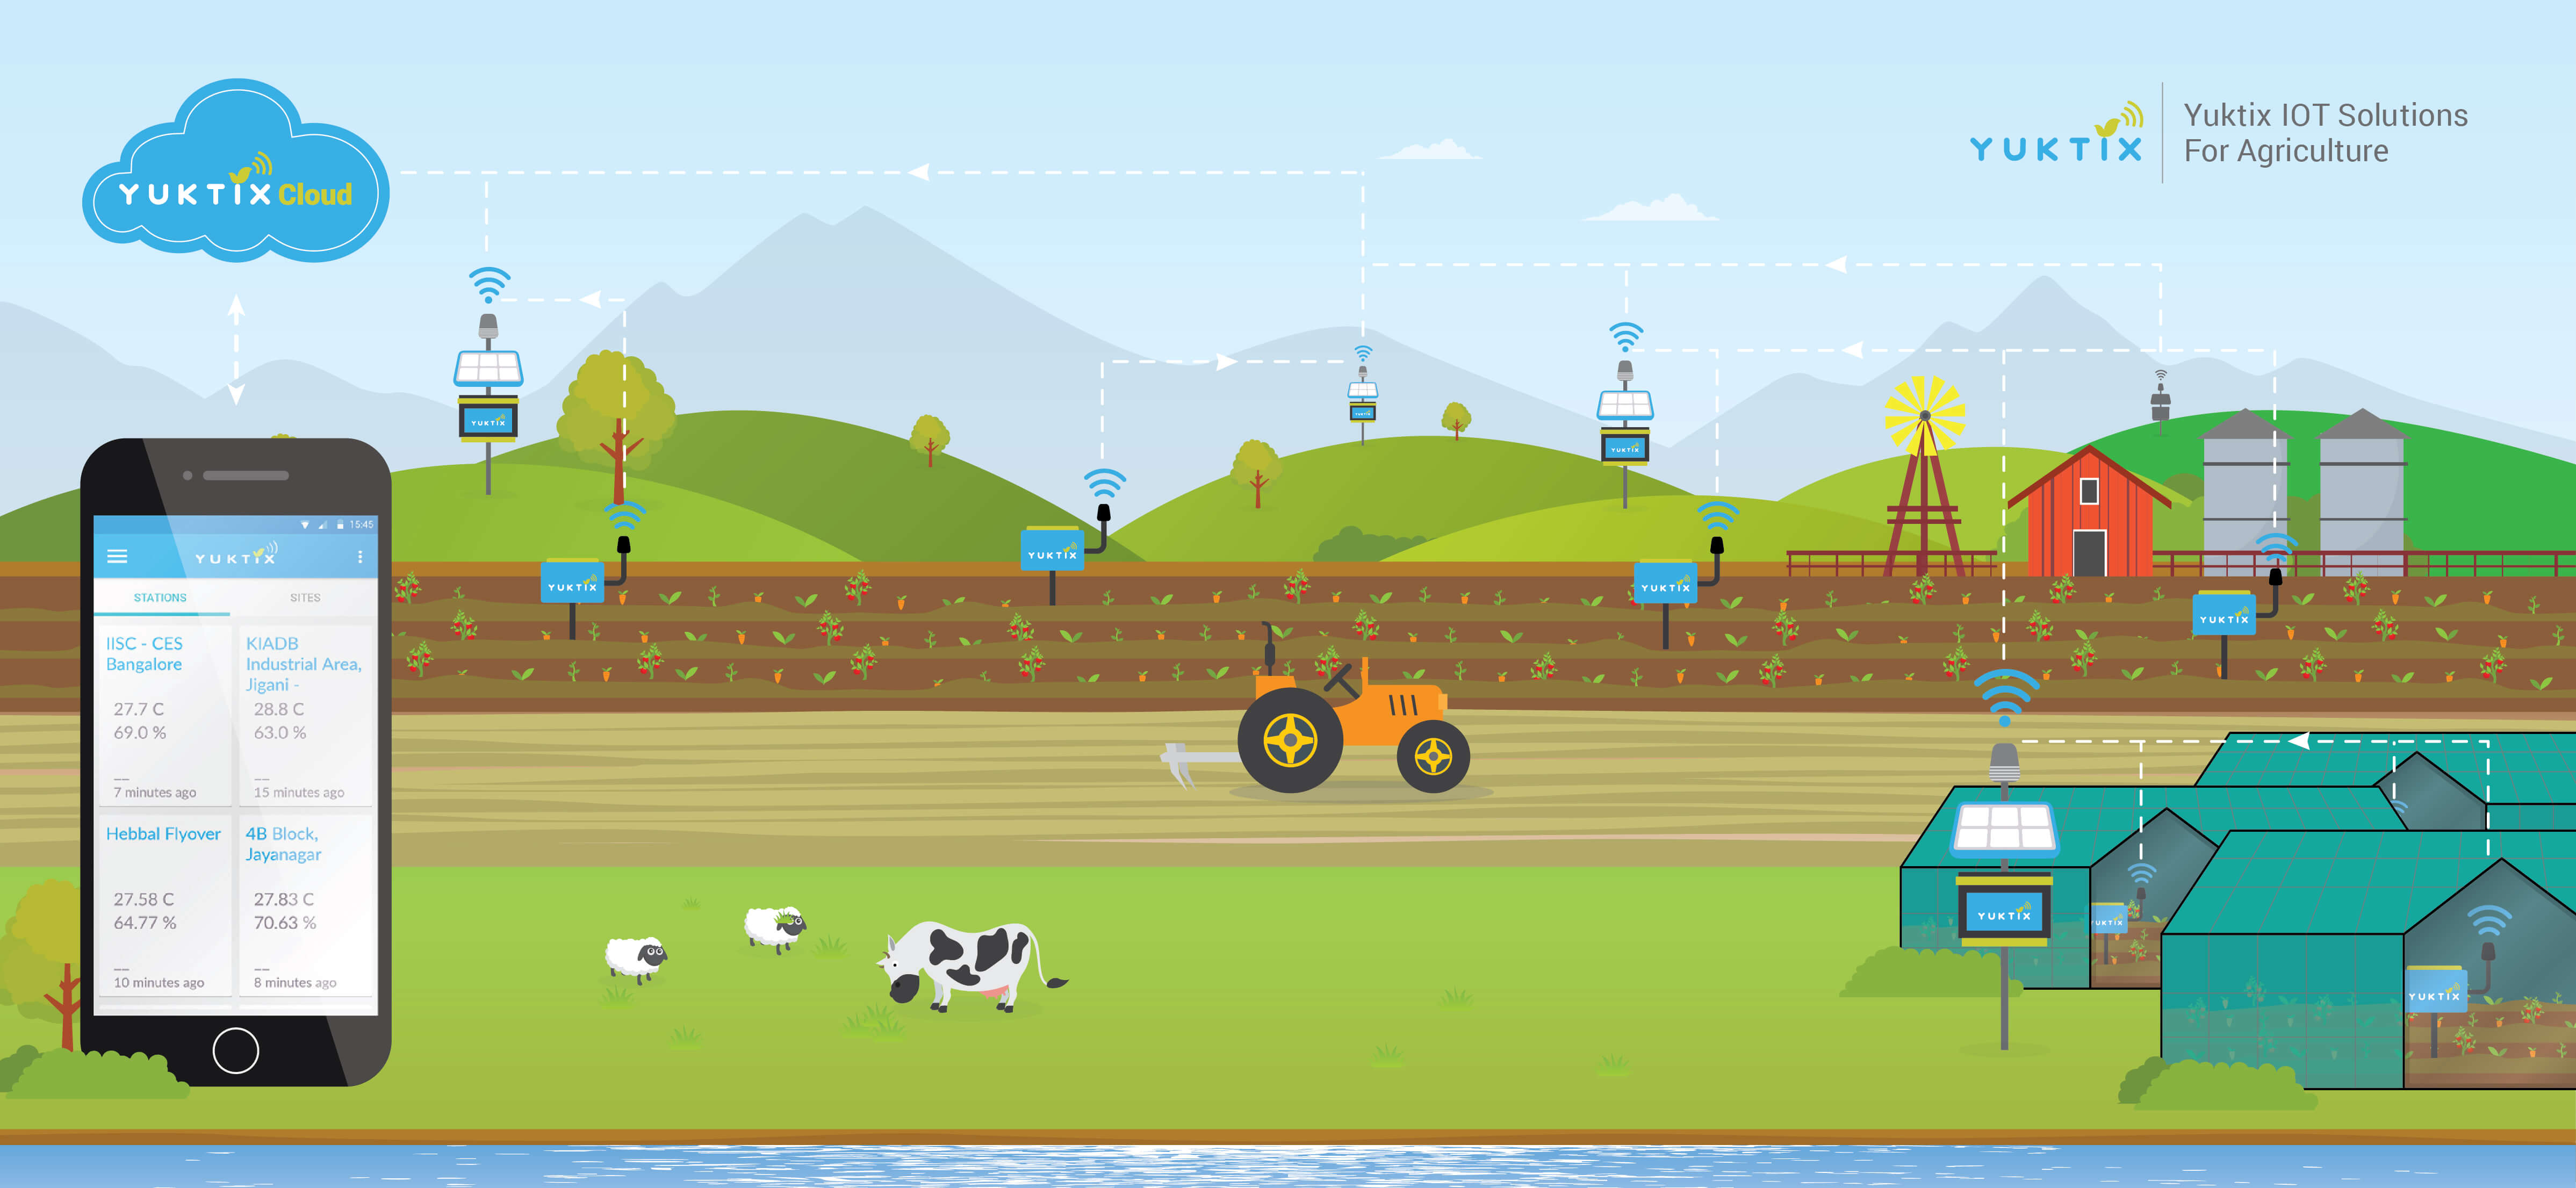 Yuktix IoT solutions illustration for agriculture